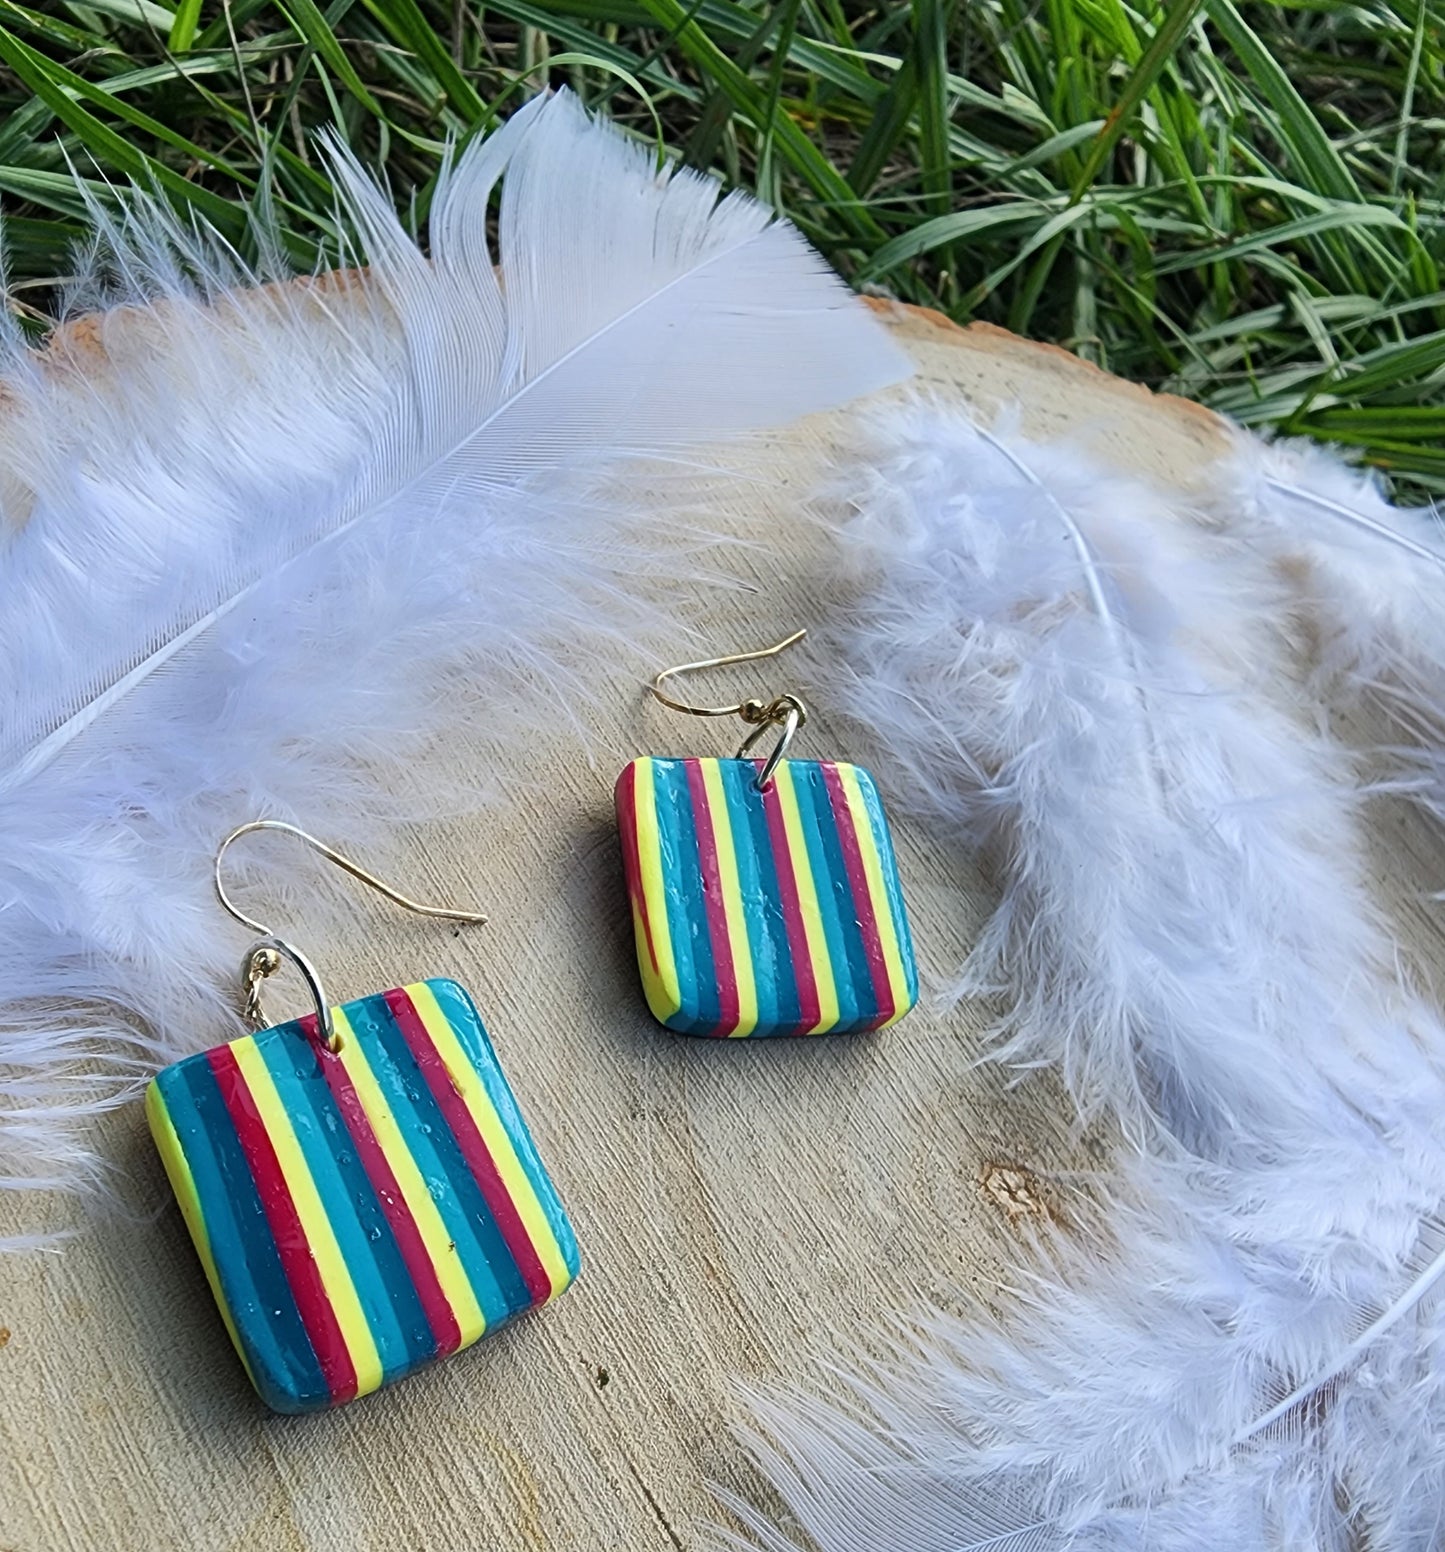 Square Striped Clay Earrings